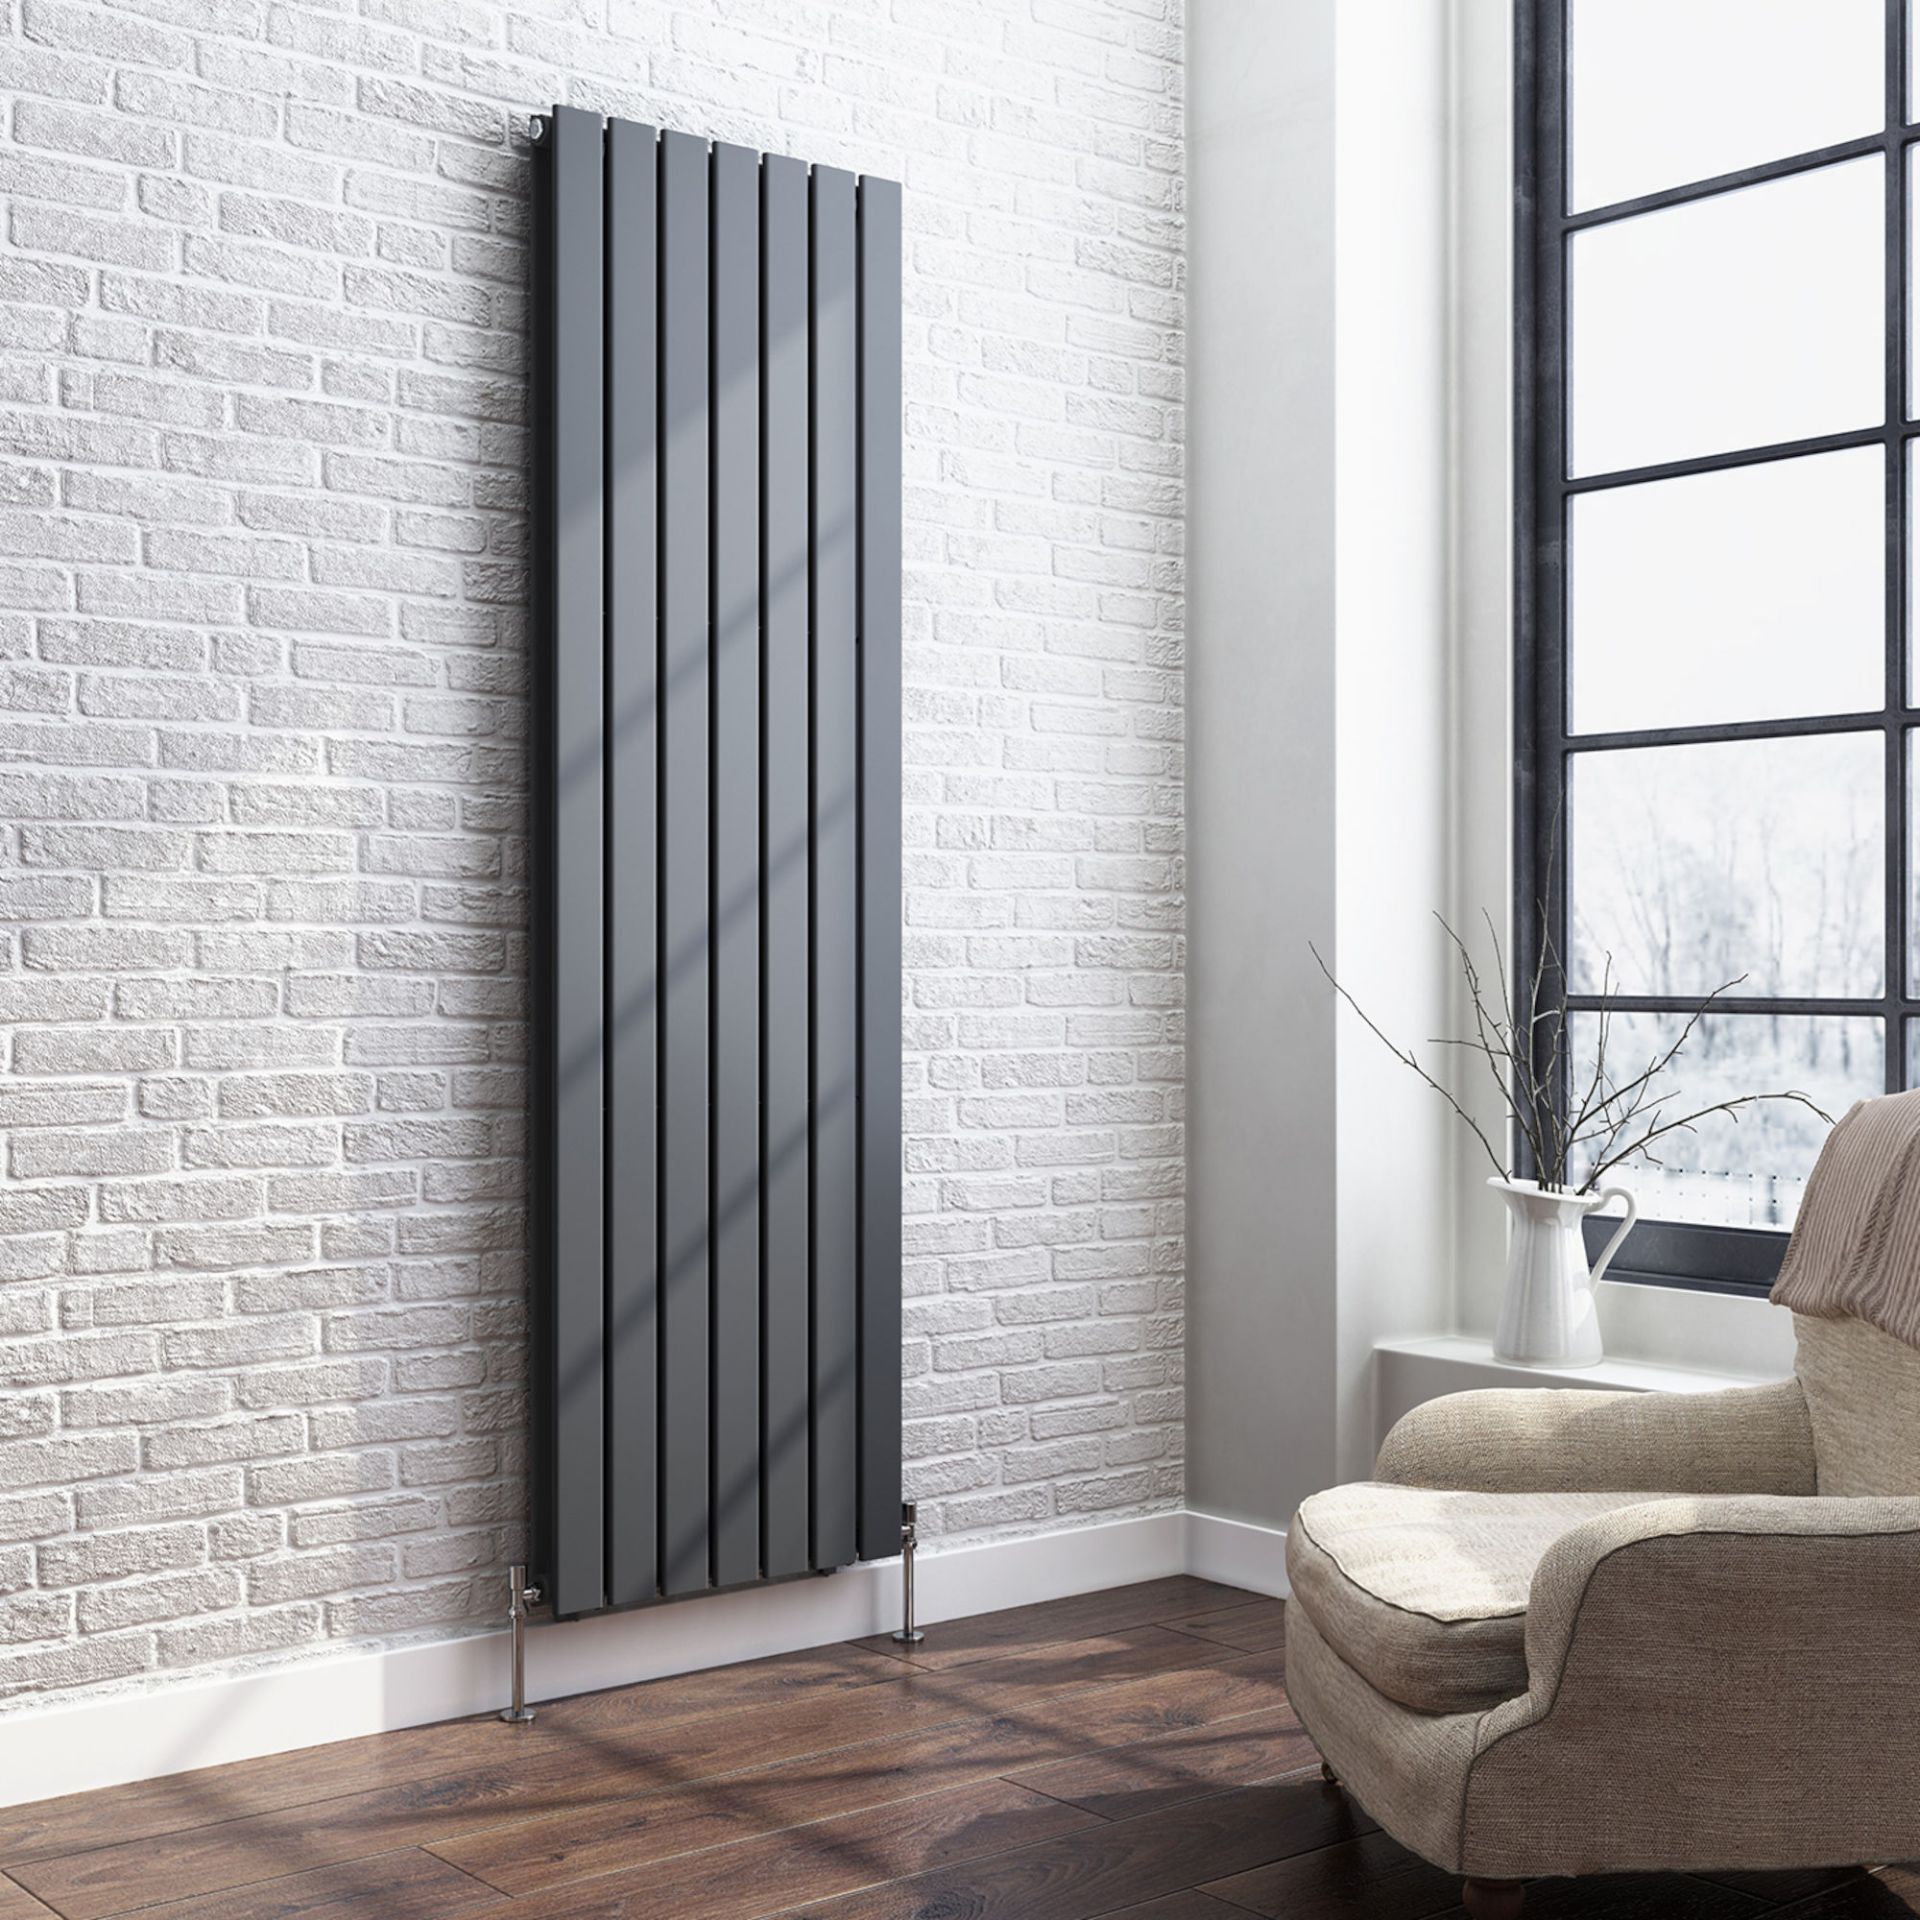 (EY19) 1800x532mm Anthracite Double Flat Panel Vertical Radiator. RRP £499.99. Made from high